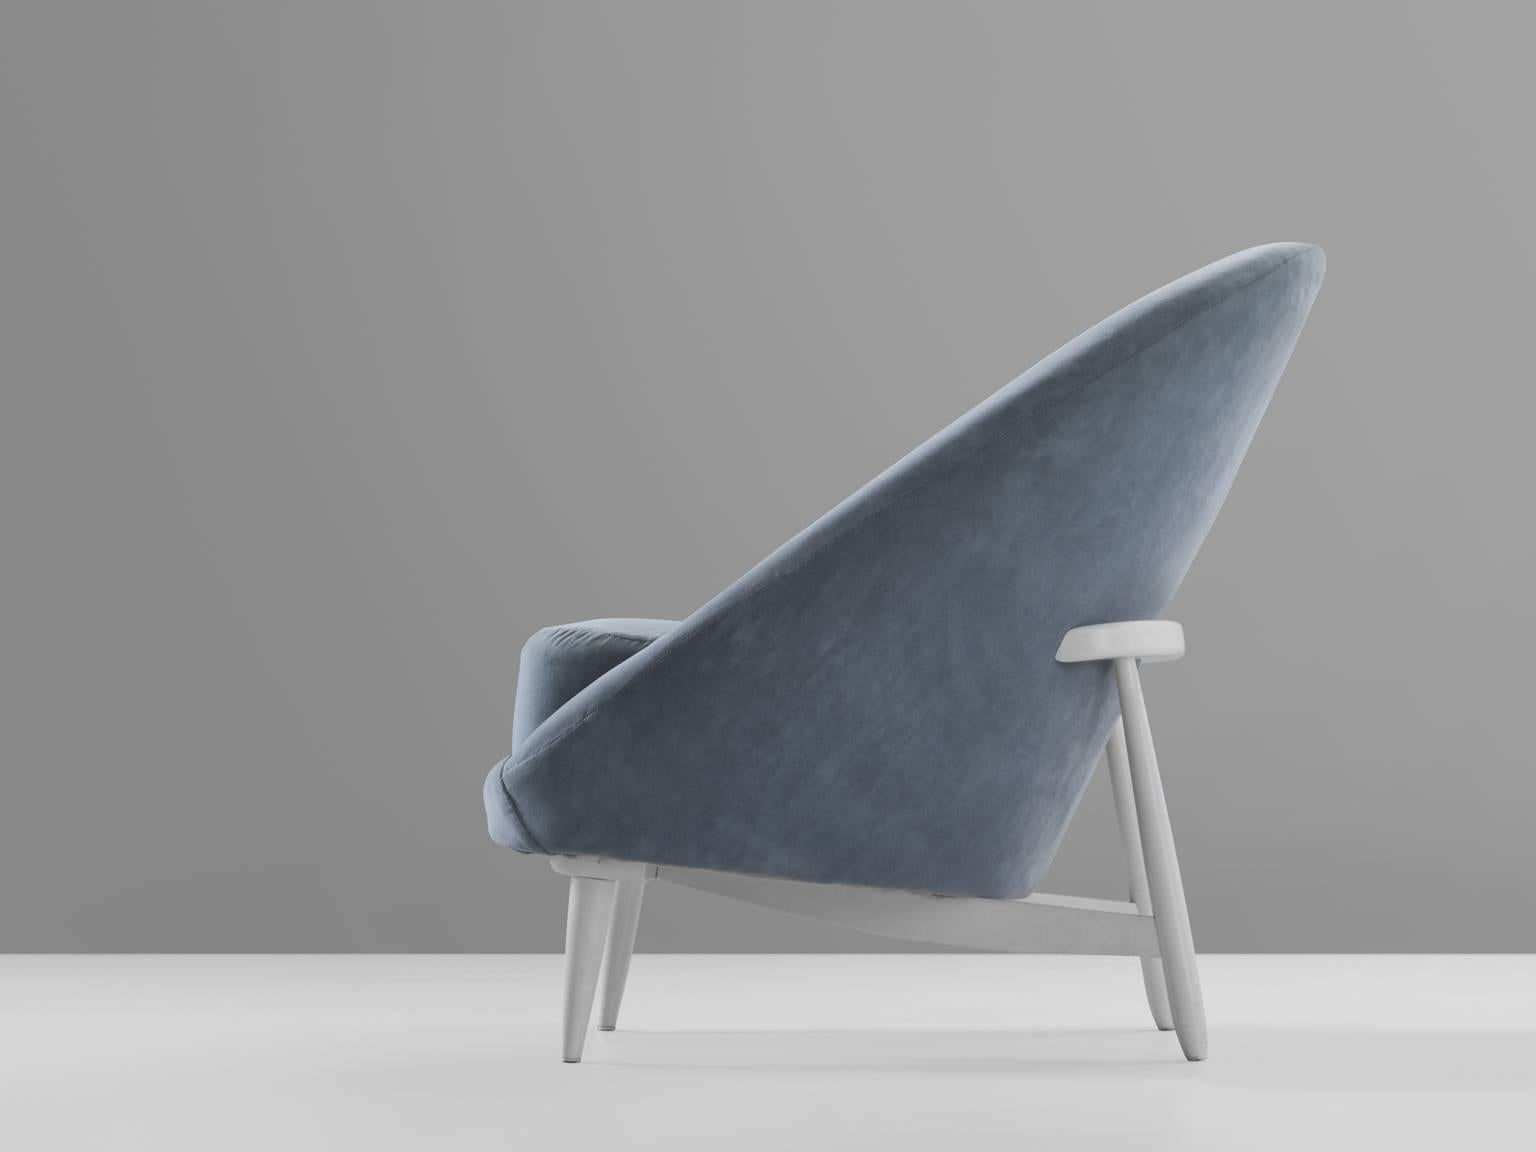 Armchair, fabric and painted beech, 1959.

This moss ash grey voluptuous armchair by Theo Ruth (1915-) for Artifort is a very strong singular item. This model 115 lounge chair was designed by Theo Ruth and produced by Artifort in 1959. The back